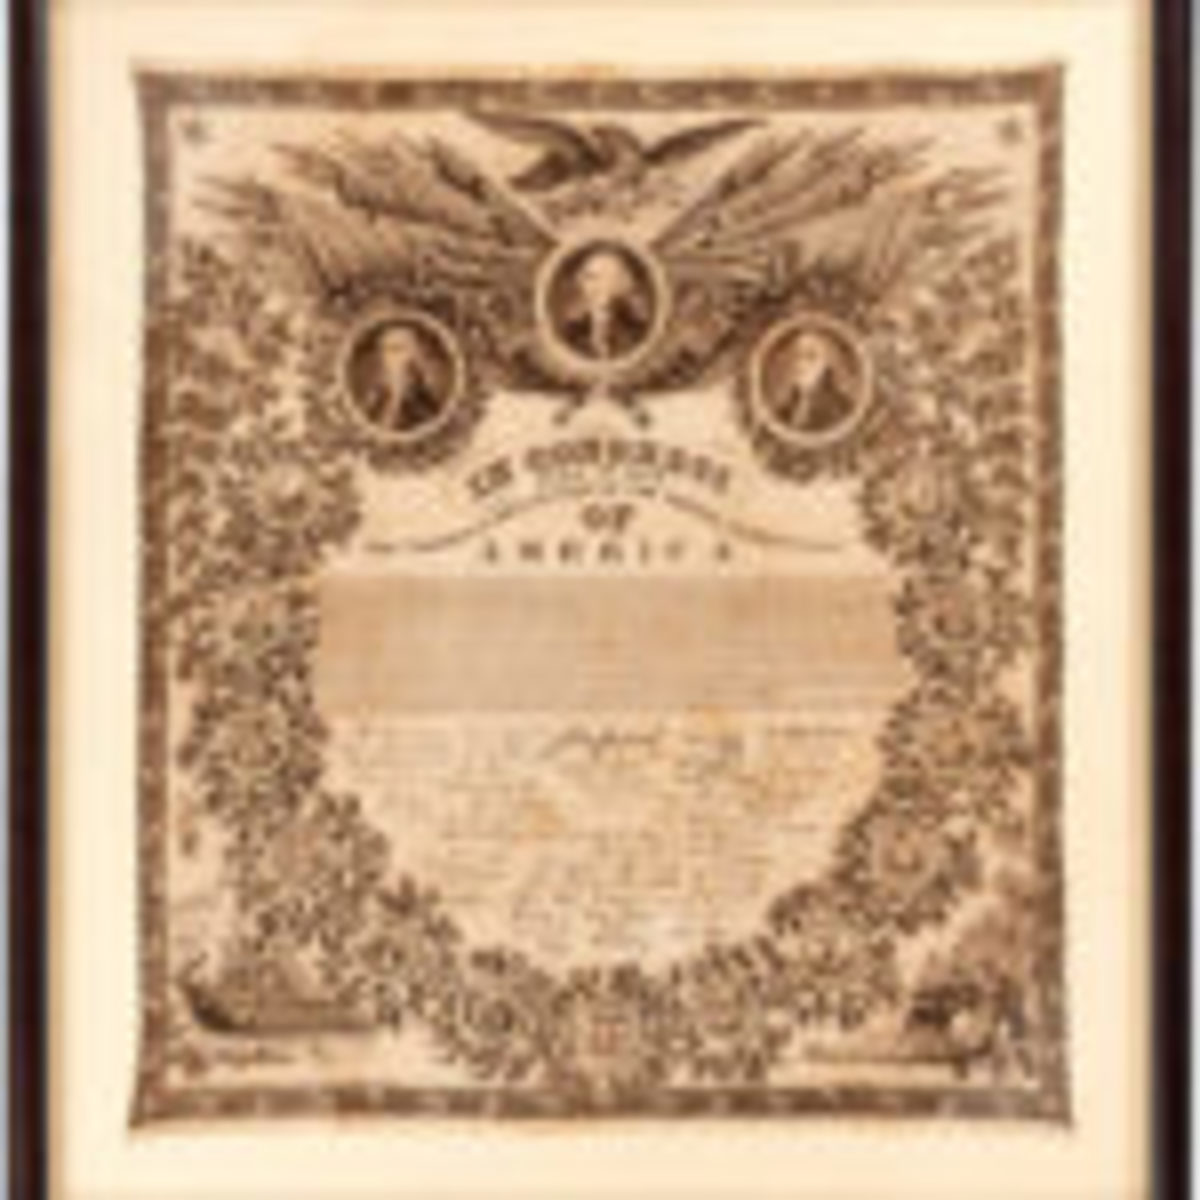 Exceptional circa-1821 textile printing of the Declaration of Independence. Sold for $20,774 against an estimate of $1,000-$5,000.